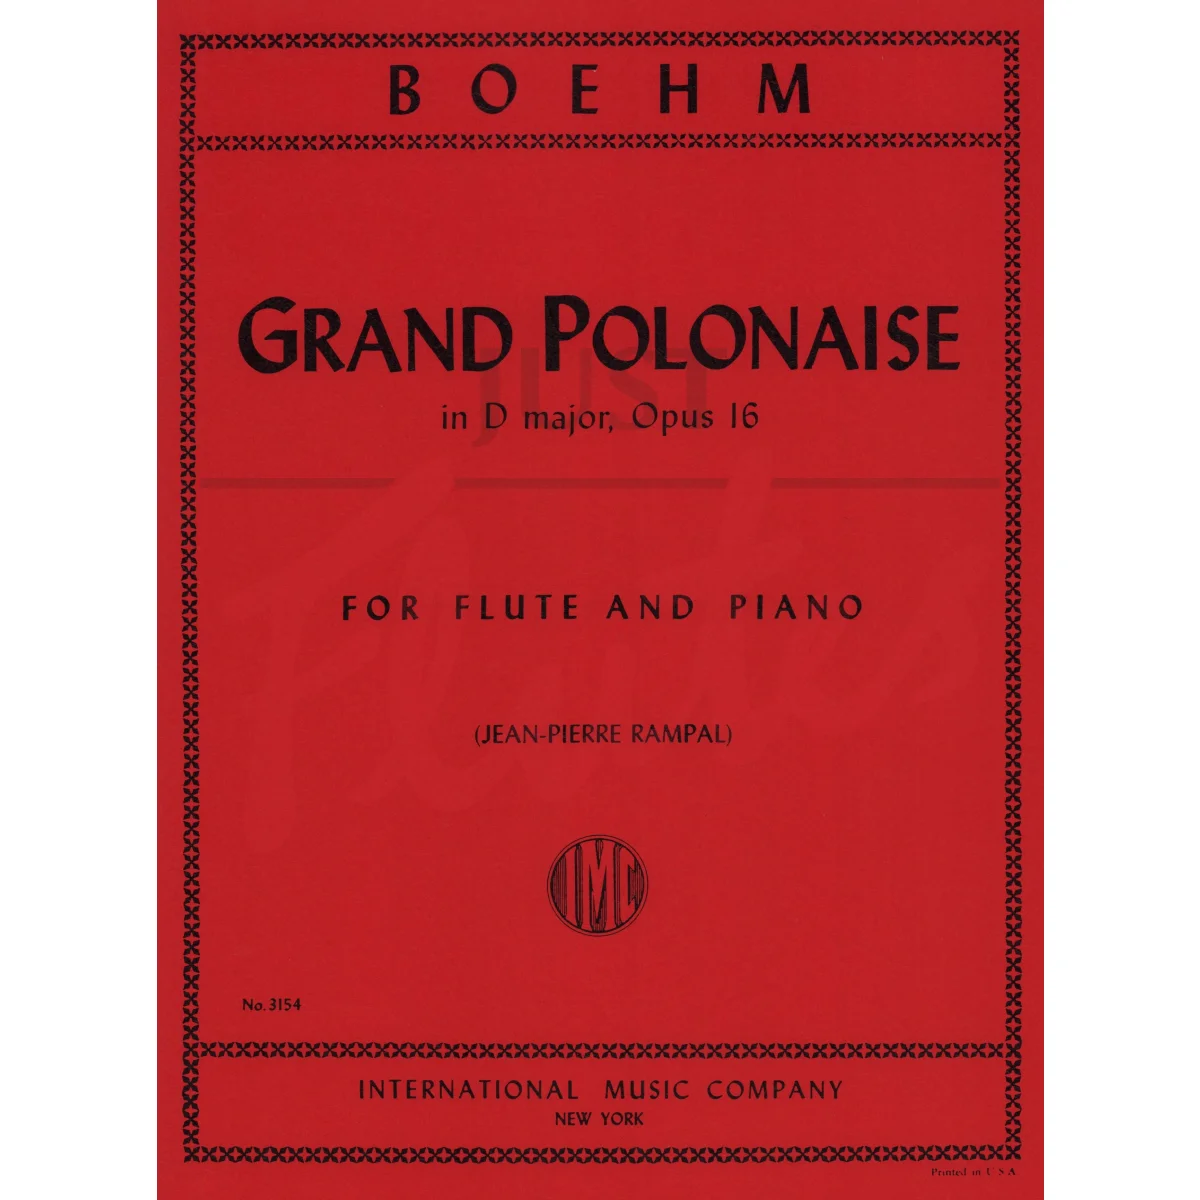 Grand Polonaise in D major for Flute and Piano